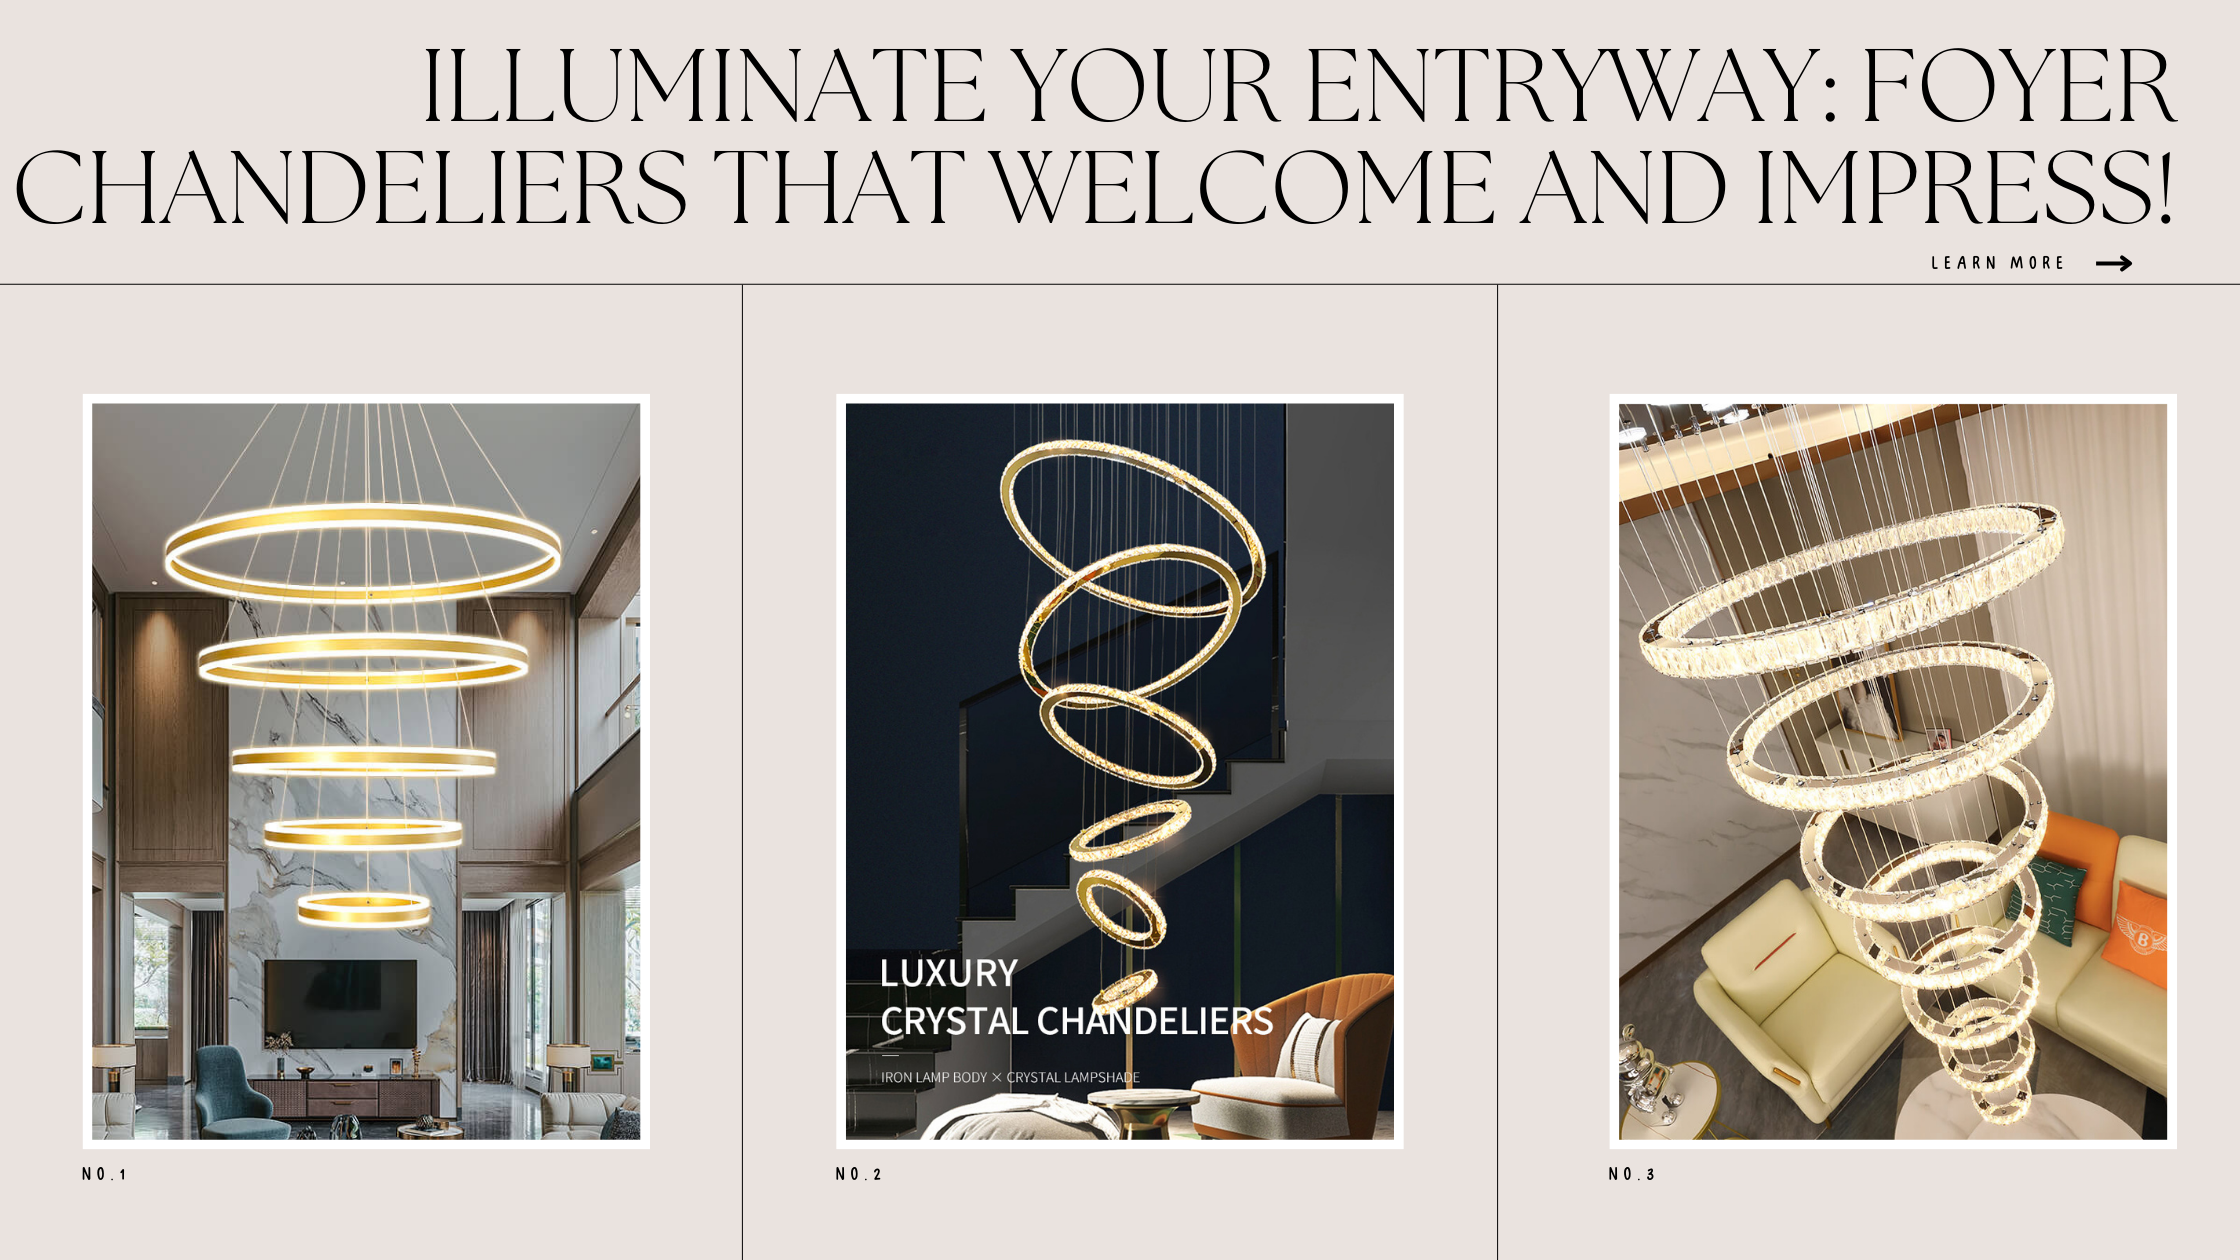 Illuminate Your Entryway: Foyer Chandeliers that Welcome and Impress!